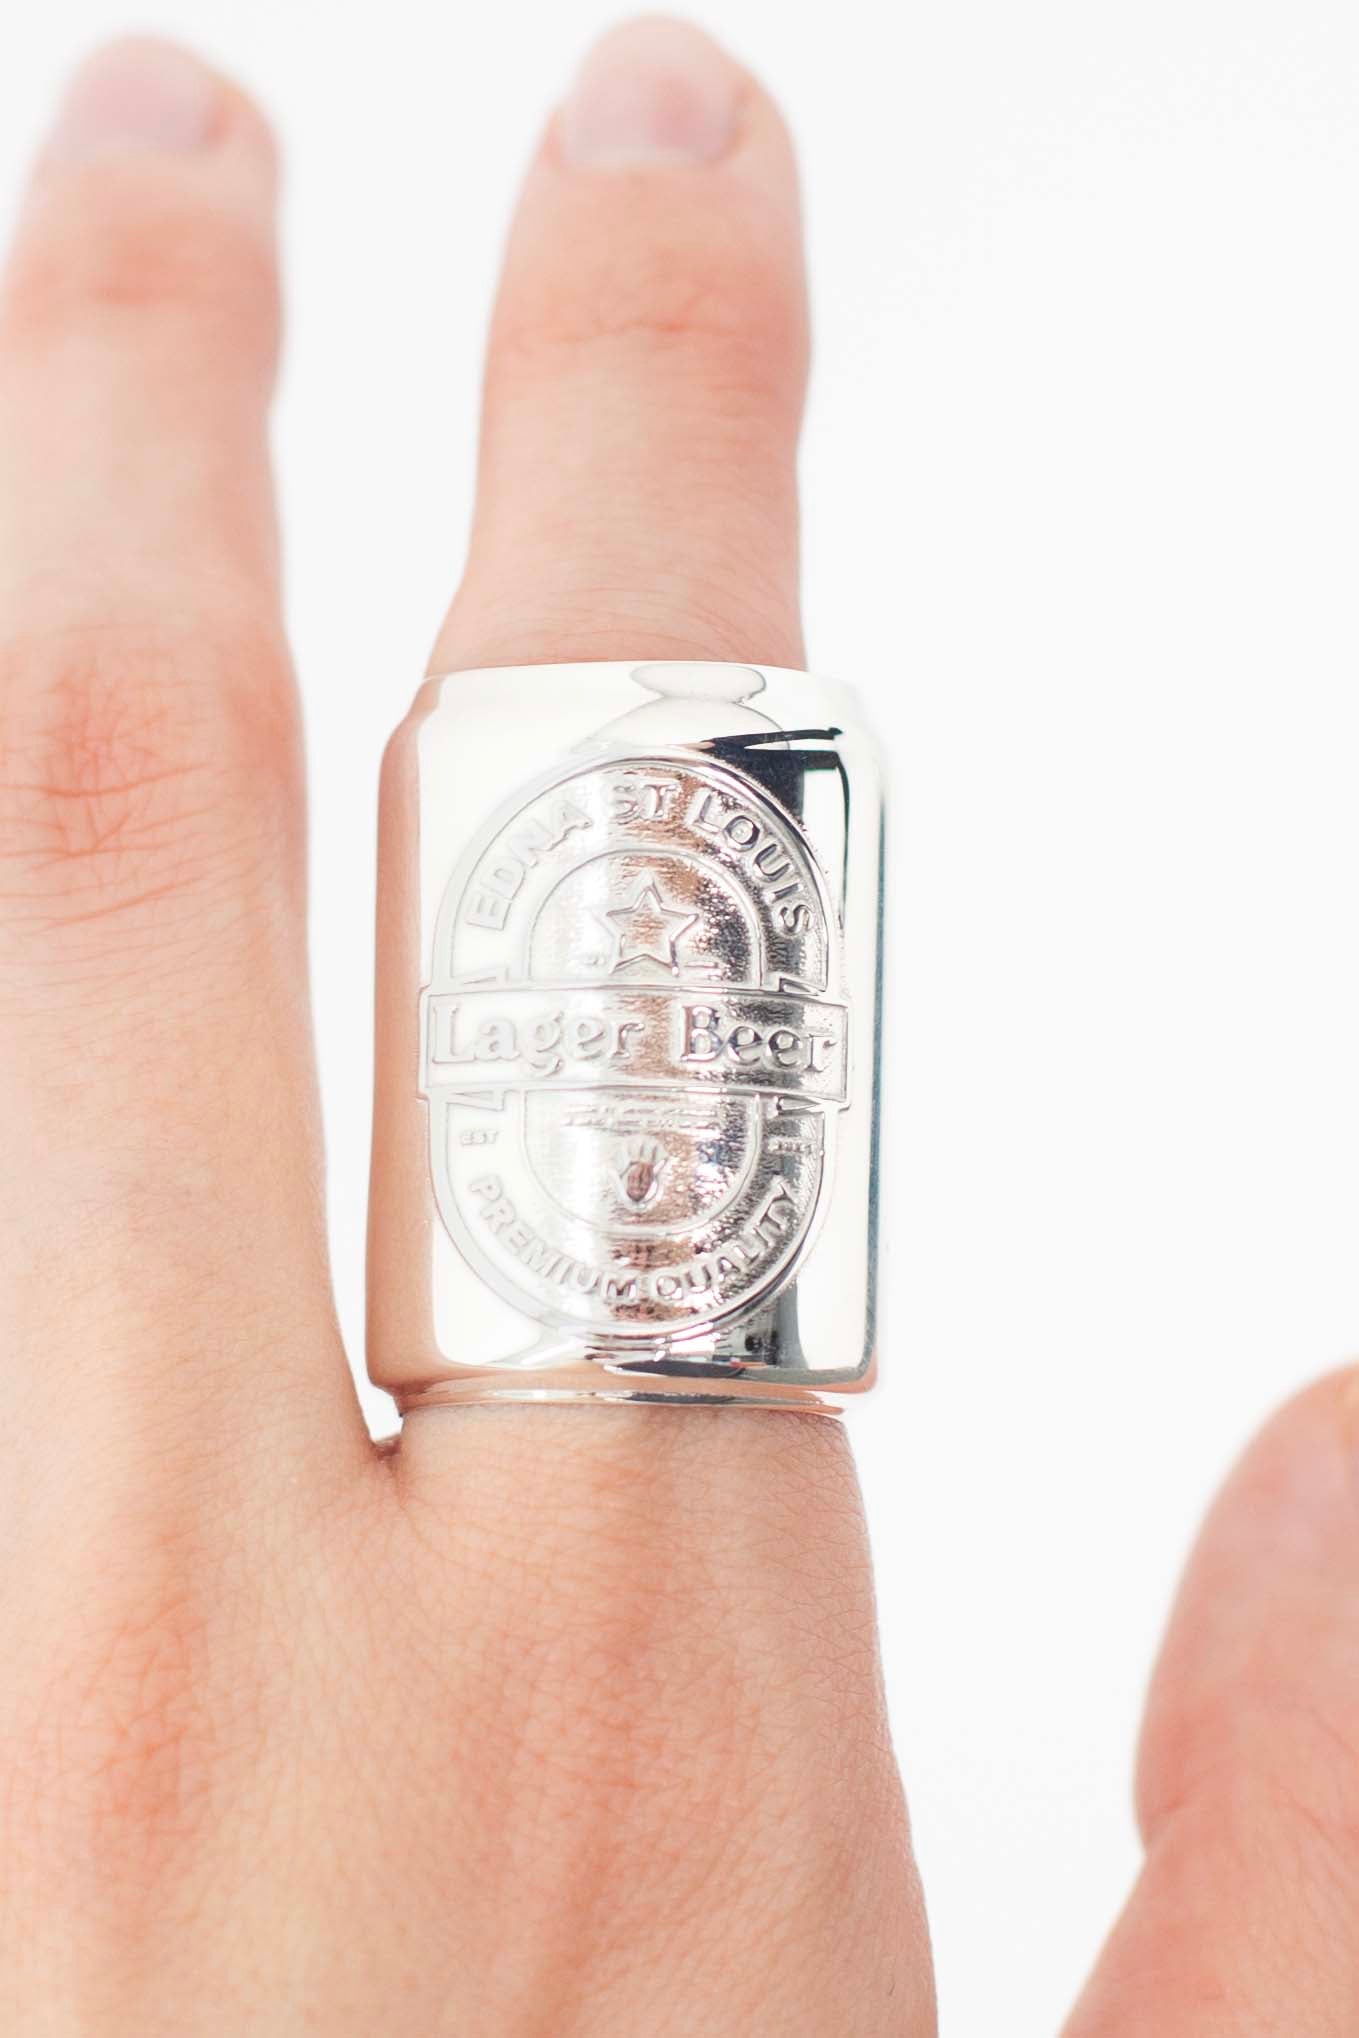 LAGER BEER CAN RING